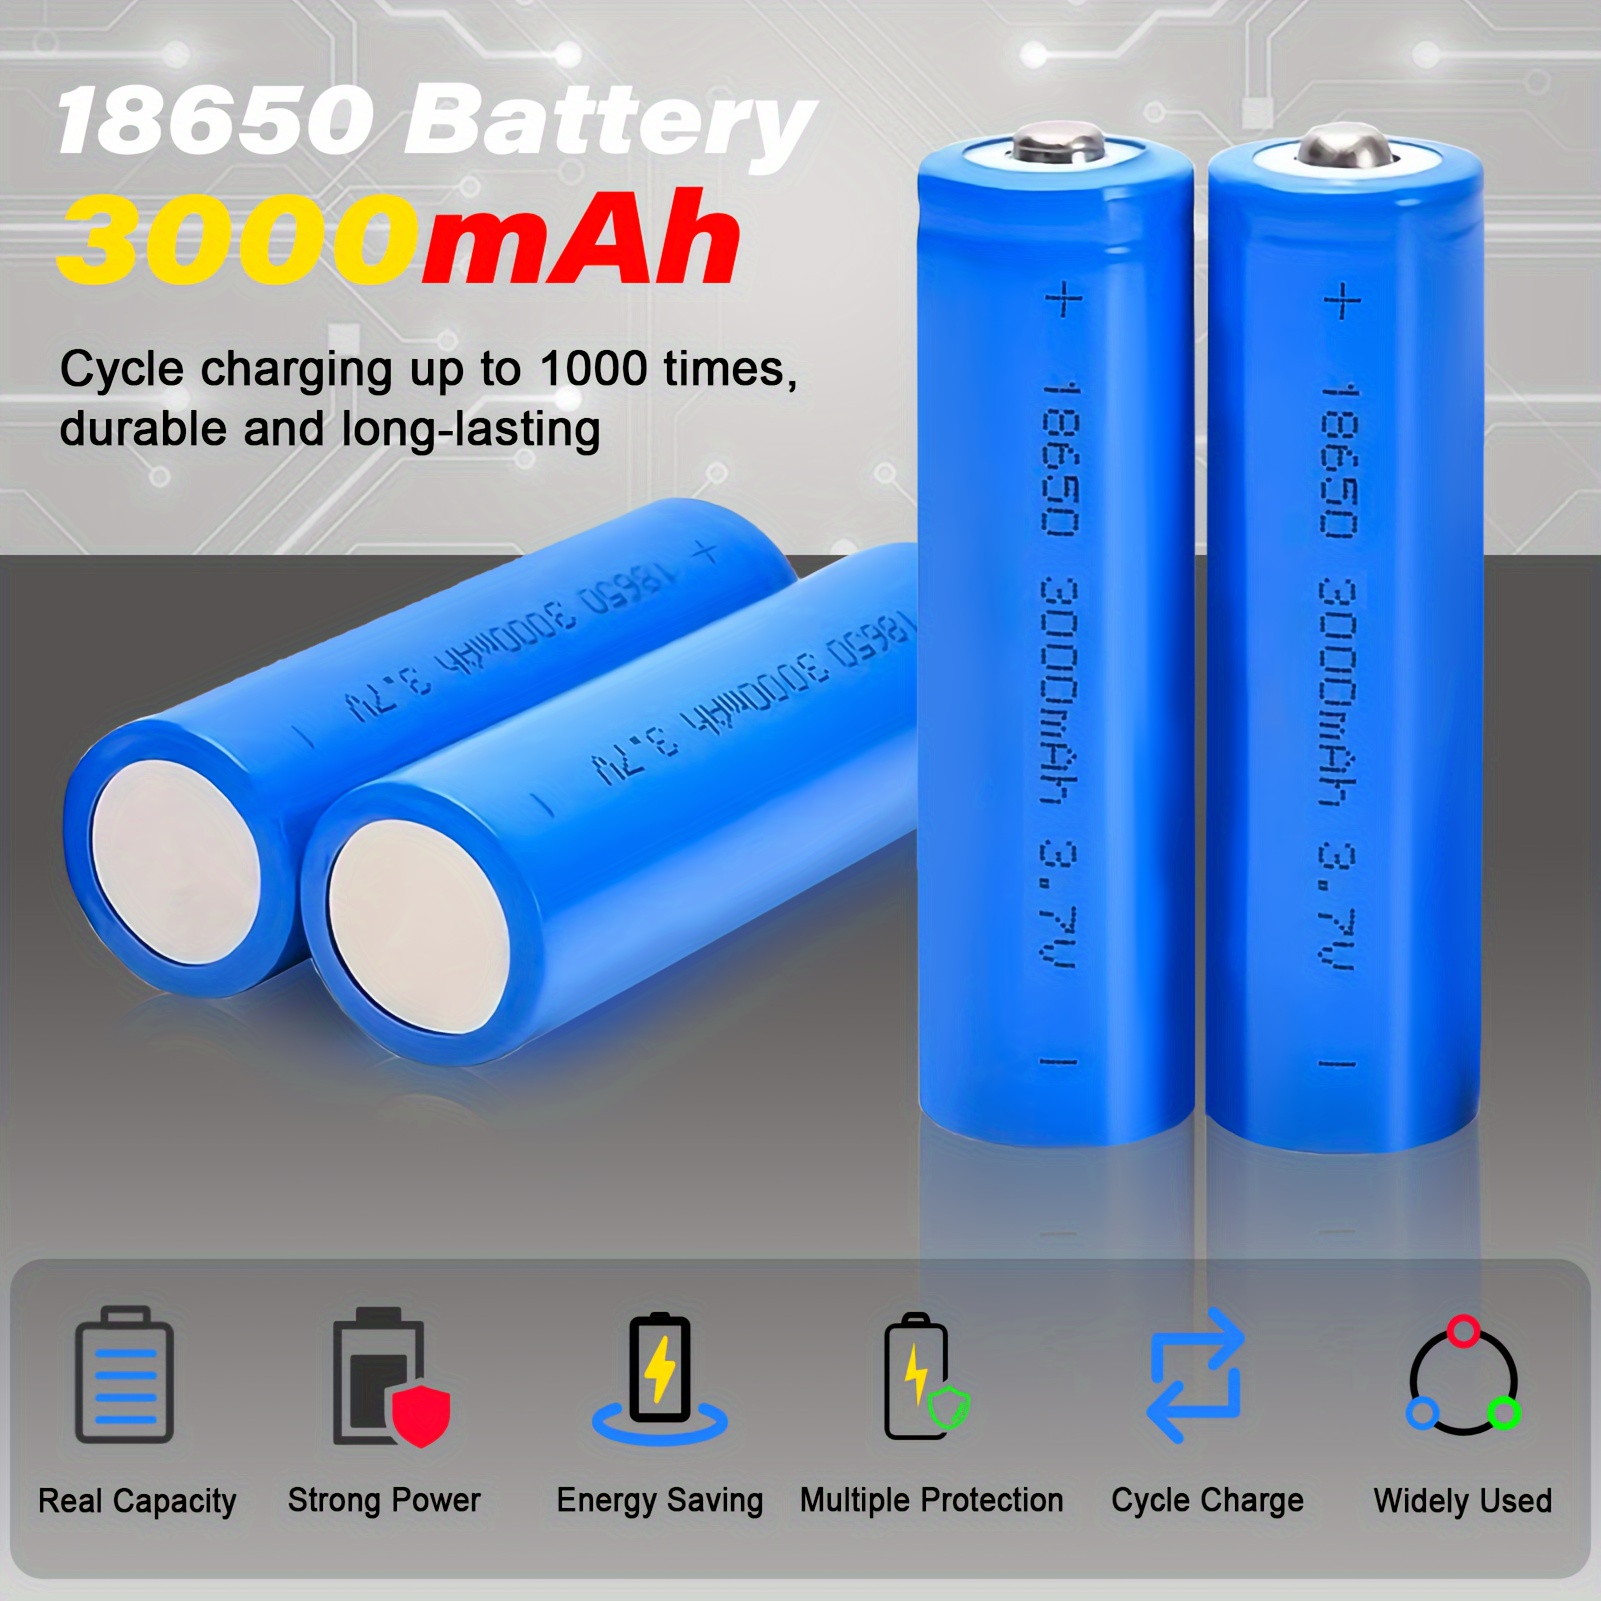 

1pc/2/4/10pcs 18650 Rechargeable Batteries, 3000mah, Button Top With Multiple Protection For Flashlights, Headlamps, Rc Cars, And More – High Capacity, Long-lasting Power Supply